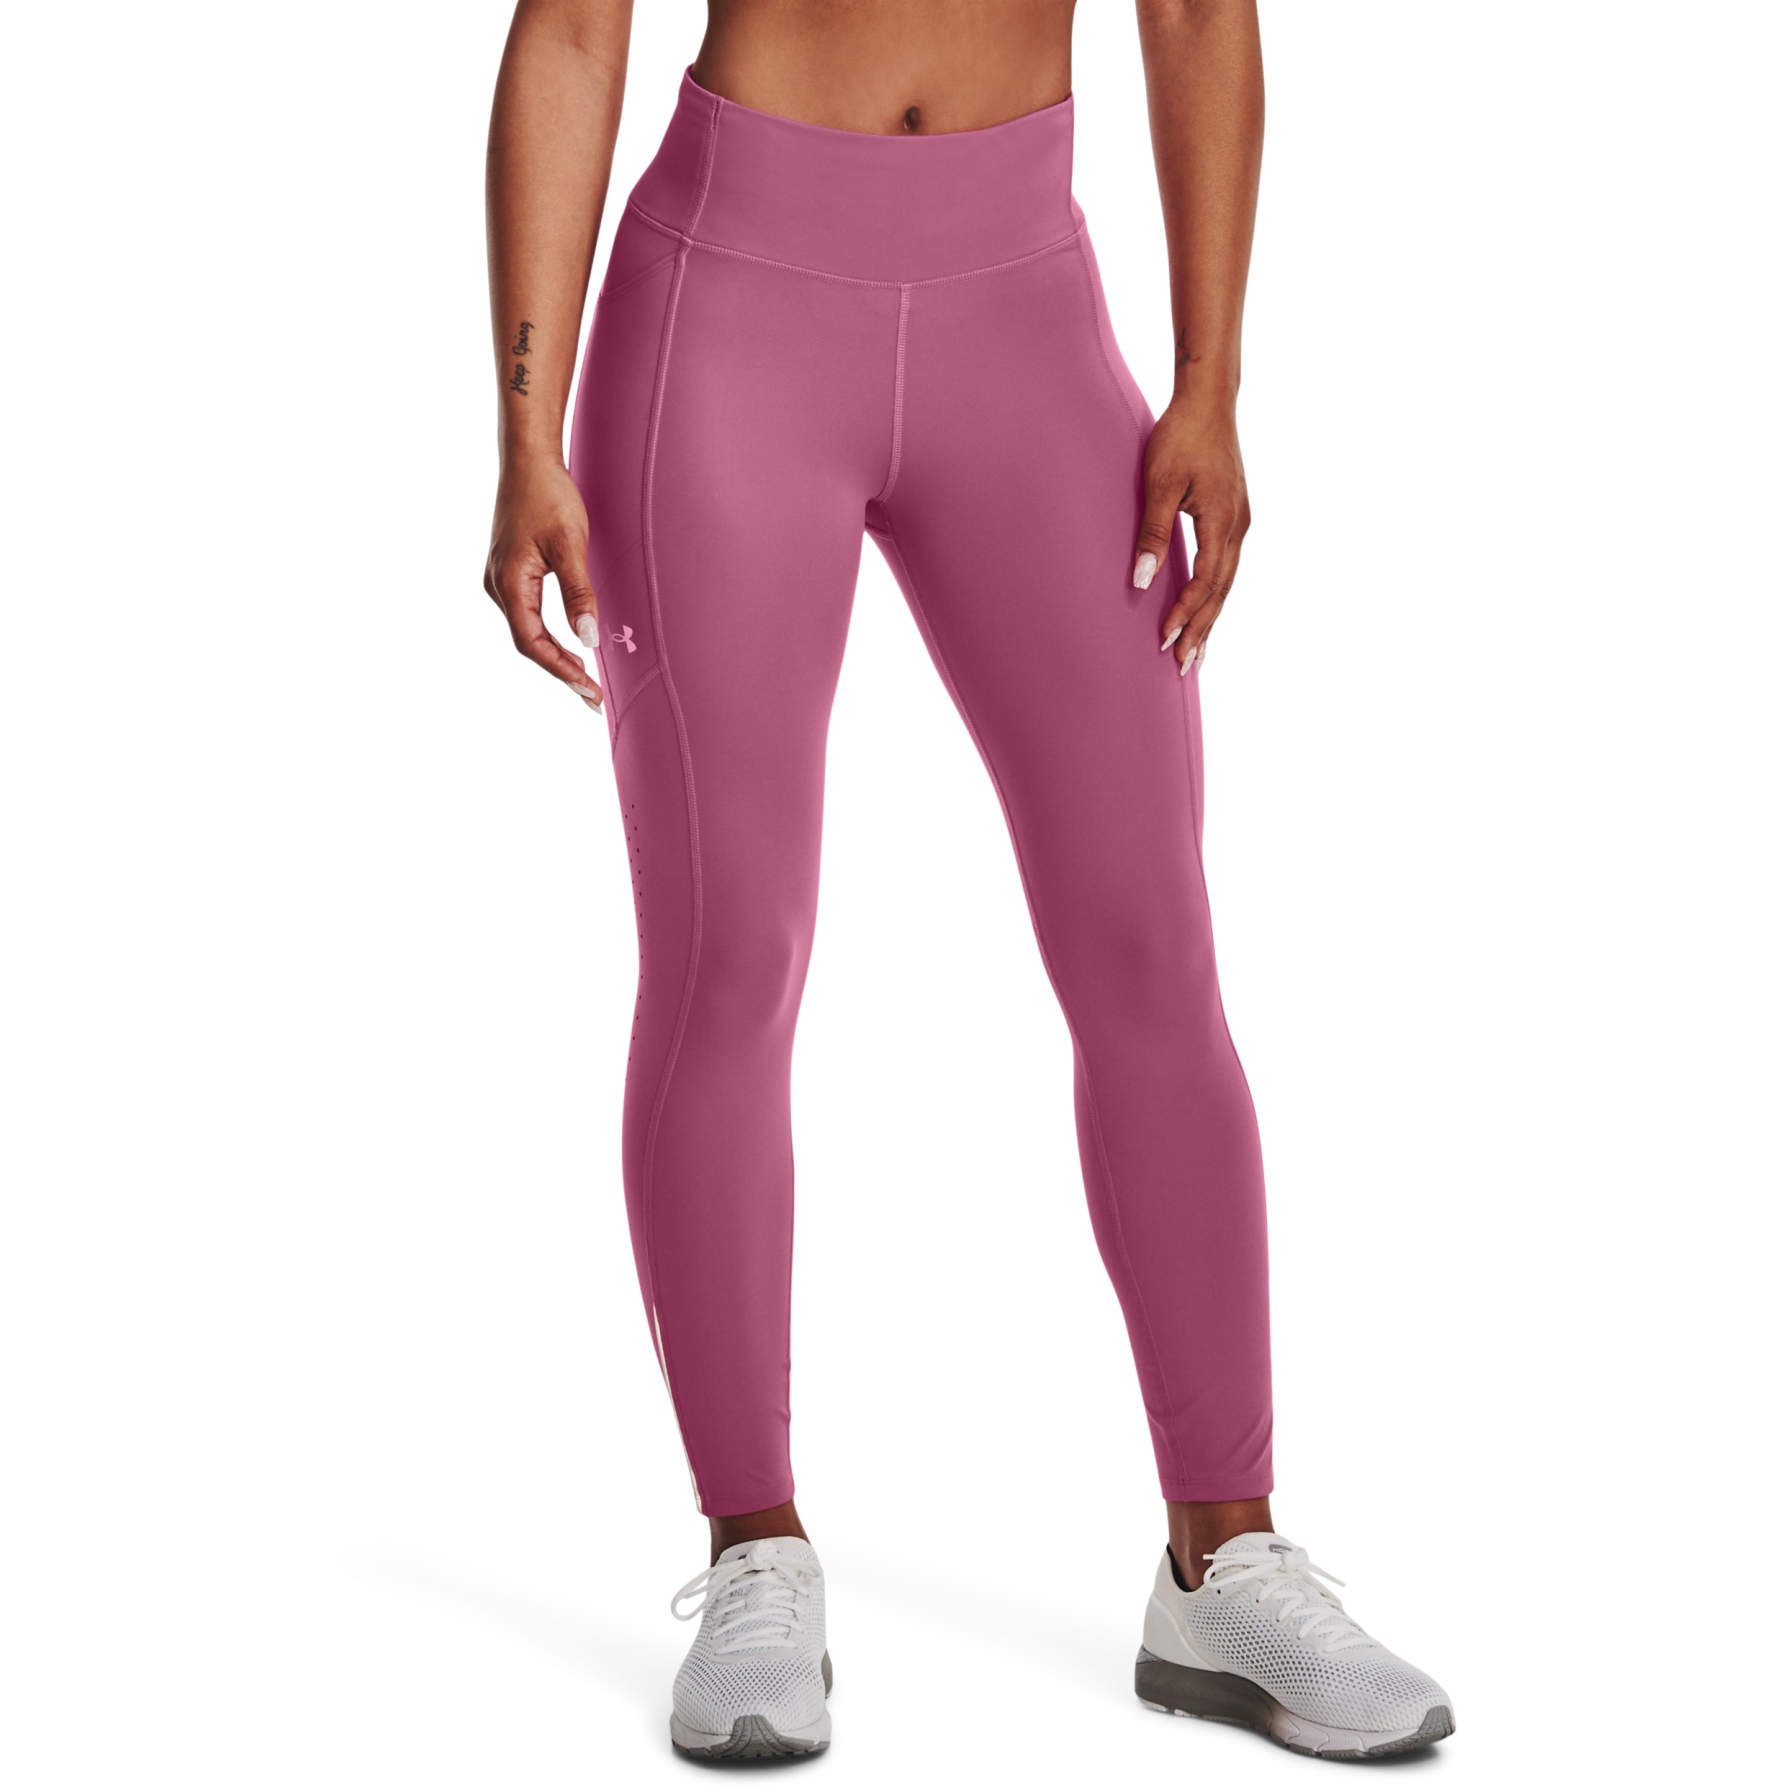 Bild von Under Armour UA Fly Fast 3.0 Ankle Tights Damen - Pace Pink/Pace Pink/Reflective